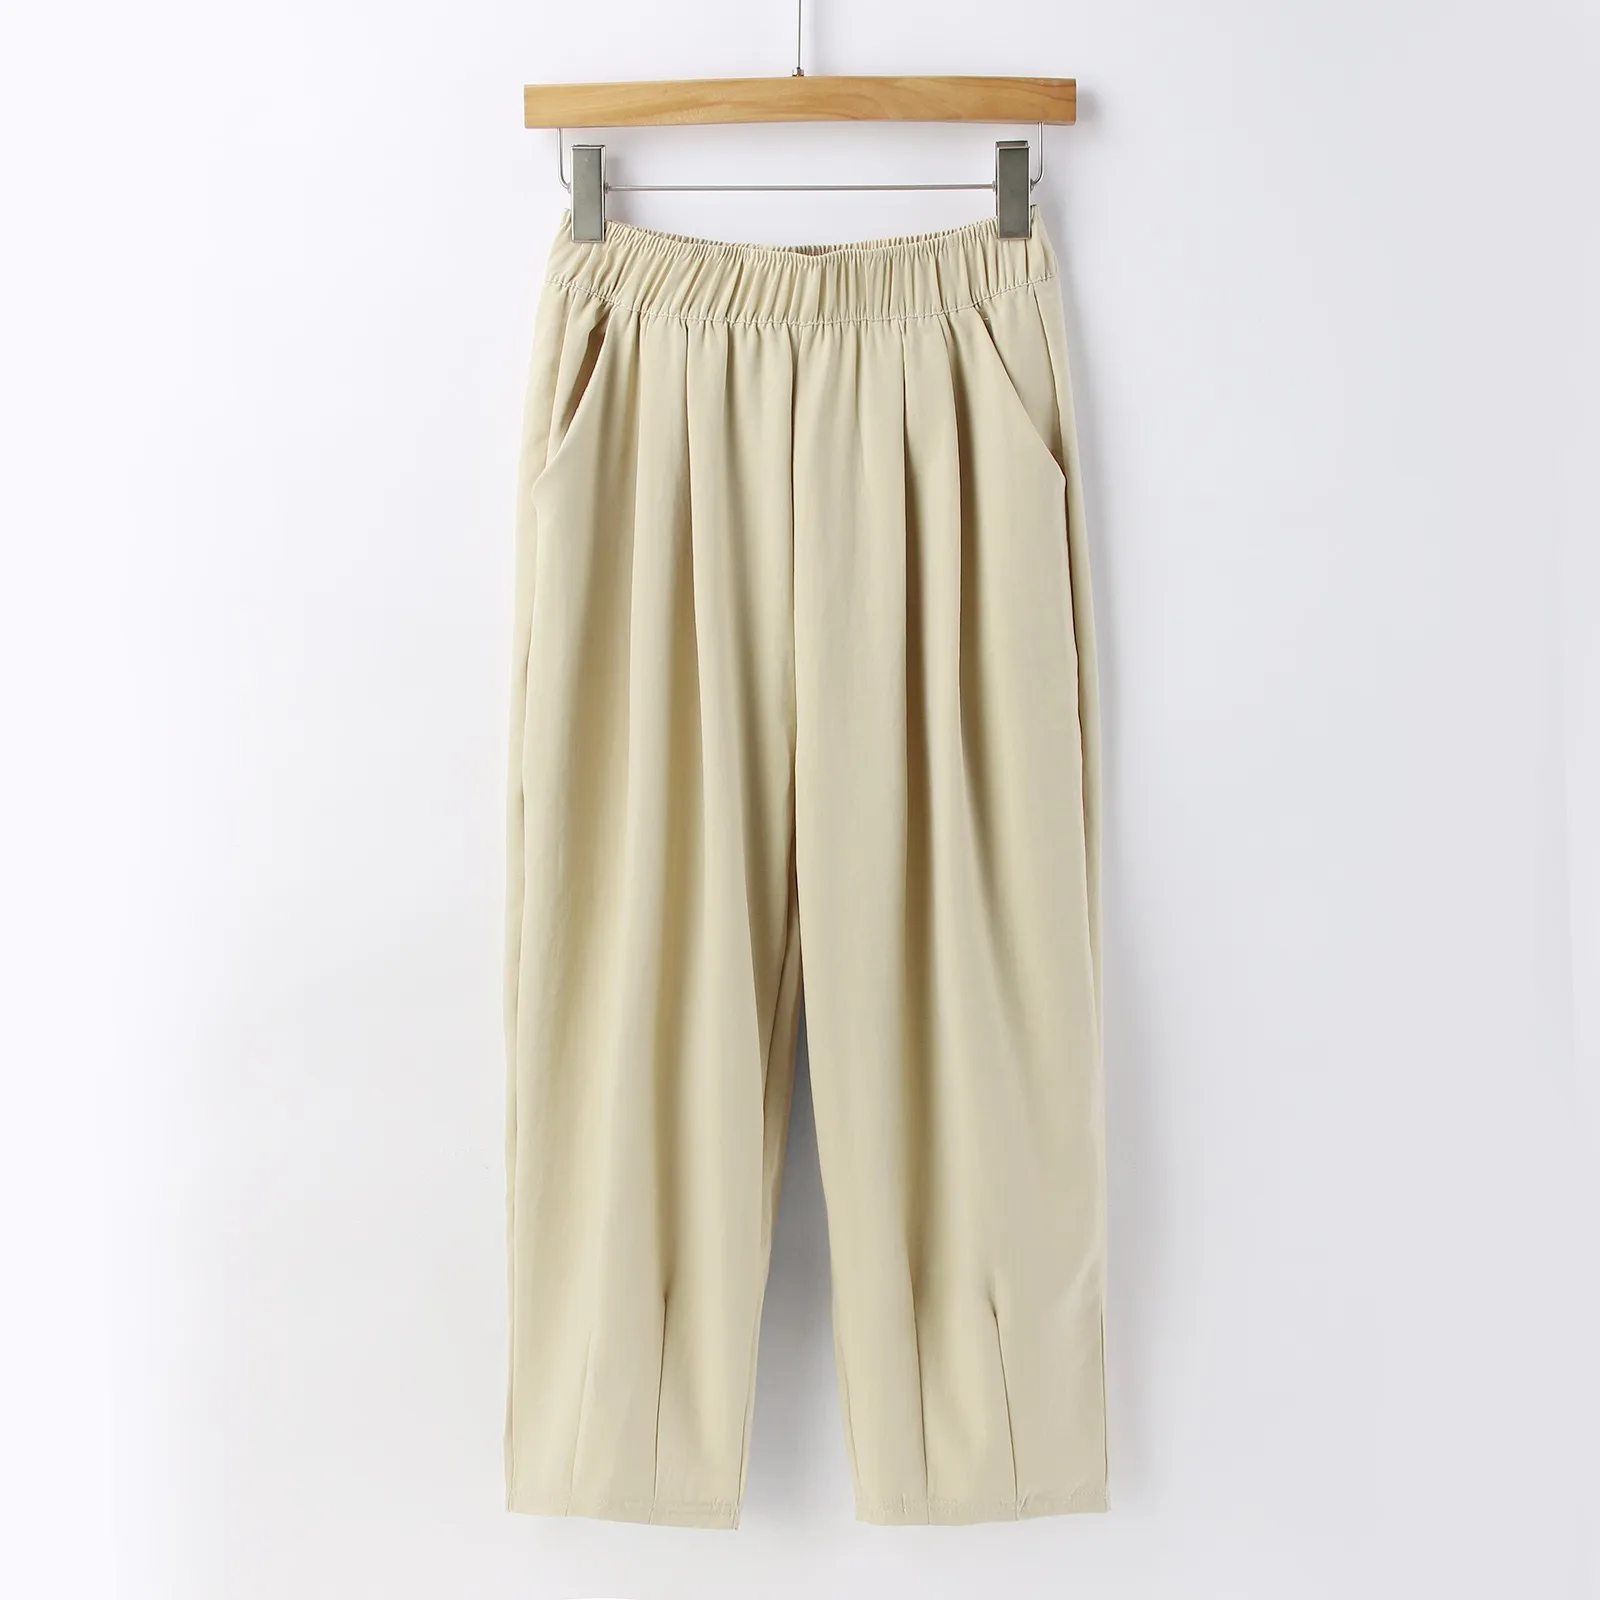 Summer Fall Casual Pants For Women's Solid Color Elastic Waist Pleated Eight Point Carrot Pants Ladies Loose Fit Trousers